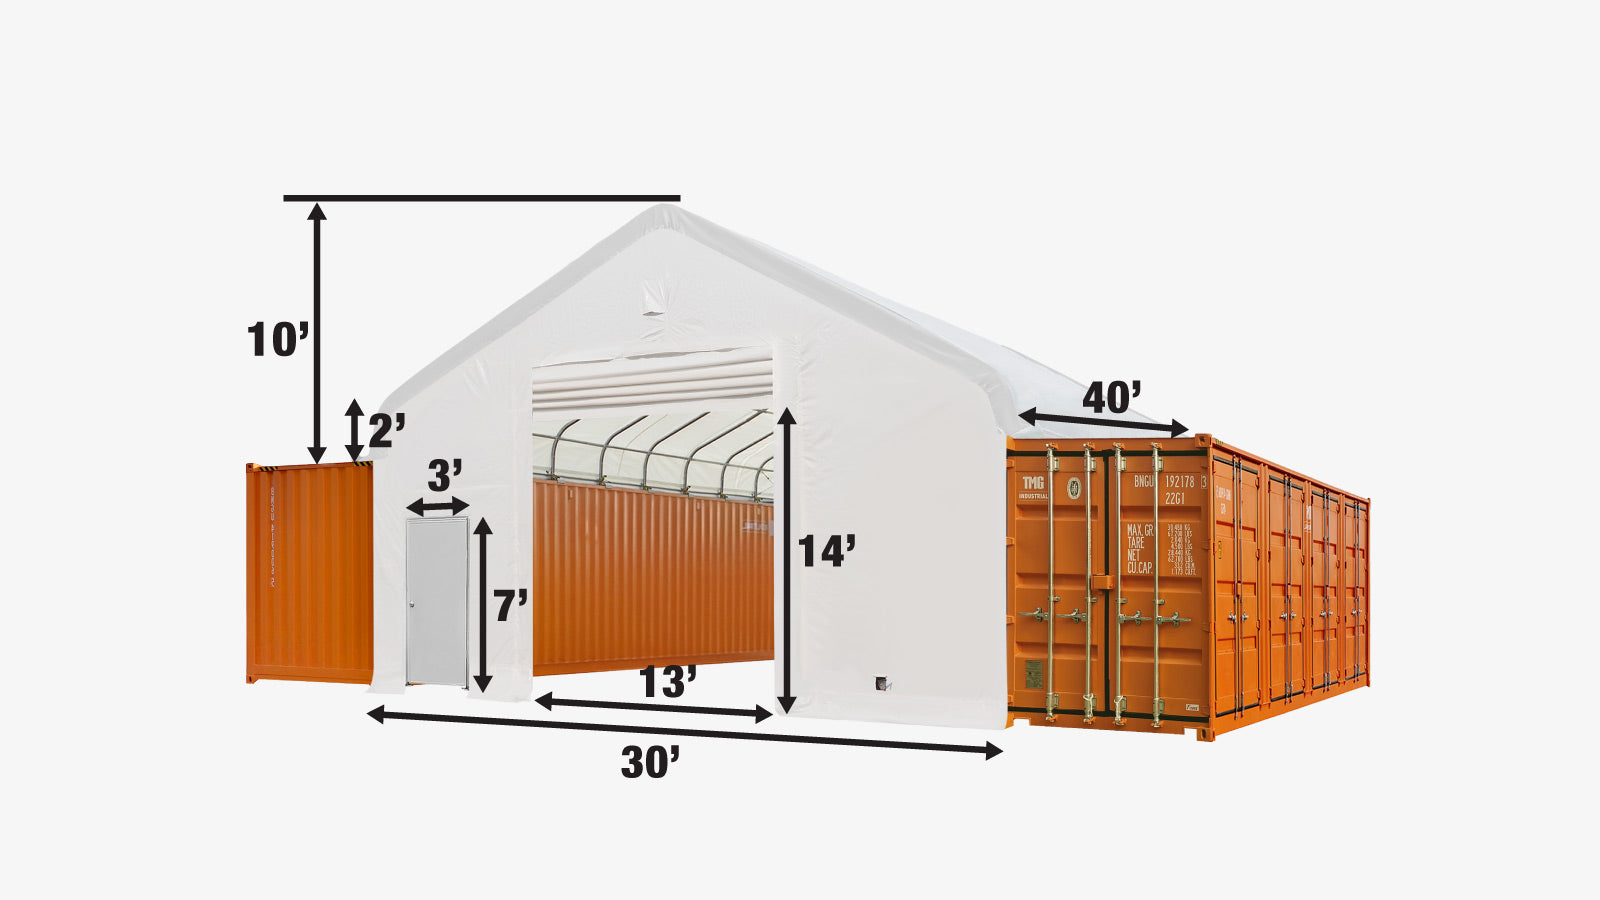 TMG Industrial Front & Back End Wall Kit, Custom Cut for TMG-ST3041CV and TMG-ST3041CE Container Peak Roof Shelter Pro Series, Front wall with mechanical rollup door, Steel Man Door, Rear closed wall, 17 oz PVC, TMG-ST30CFB-specifications-image